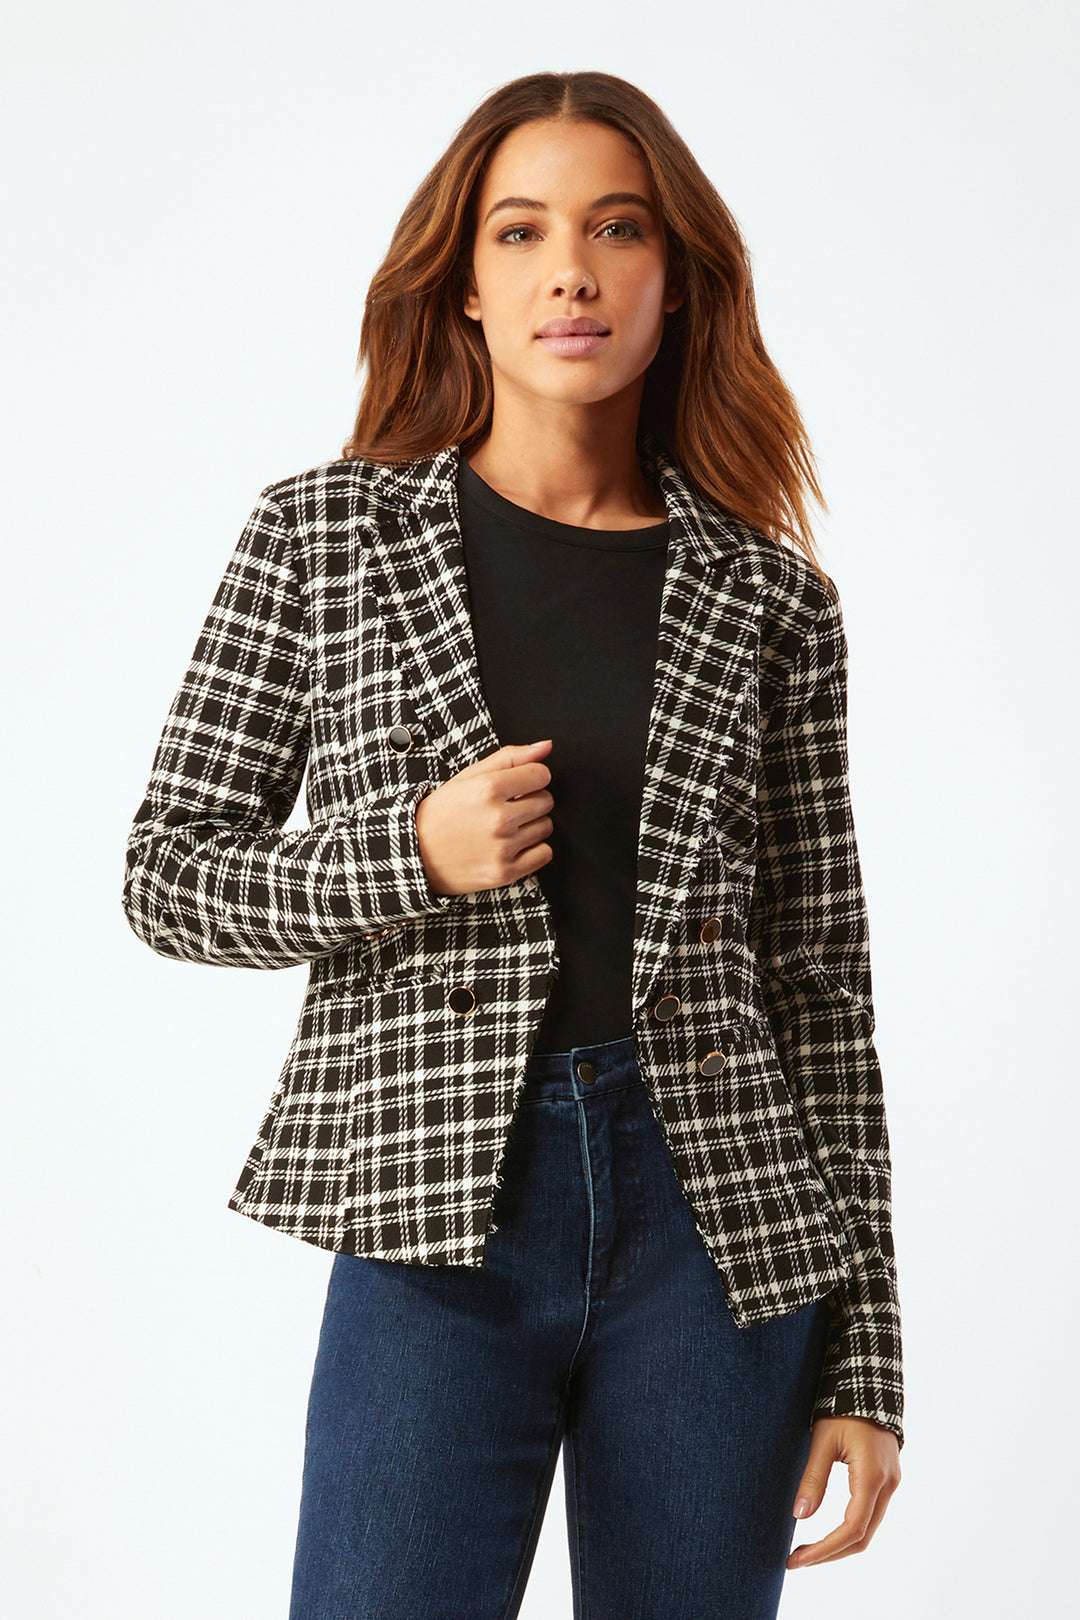 Fitted Blazer With Buttons - Black/Cream Plaid